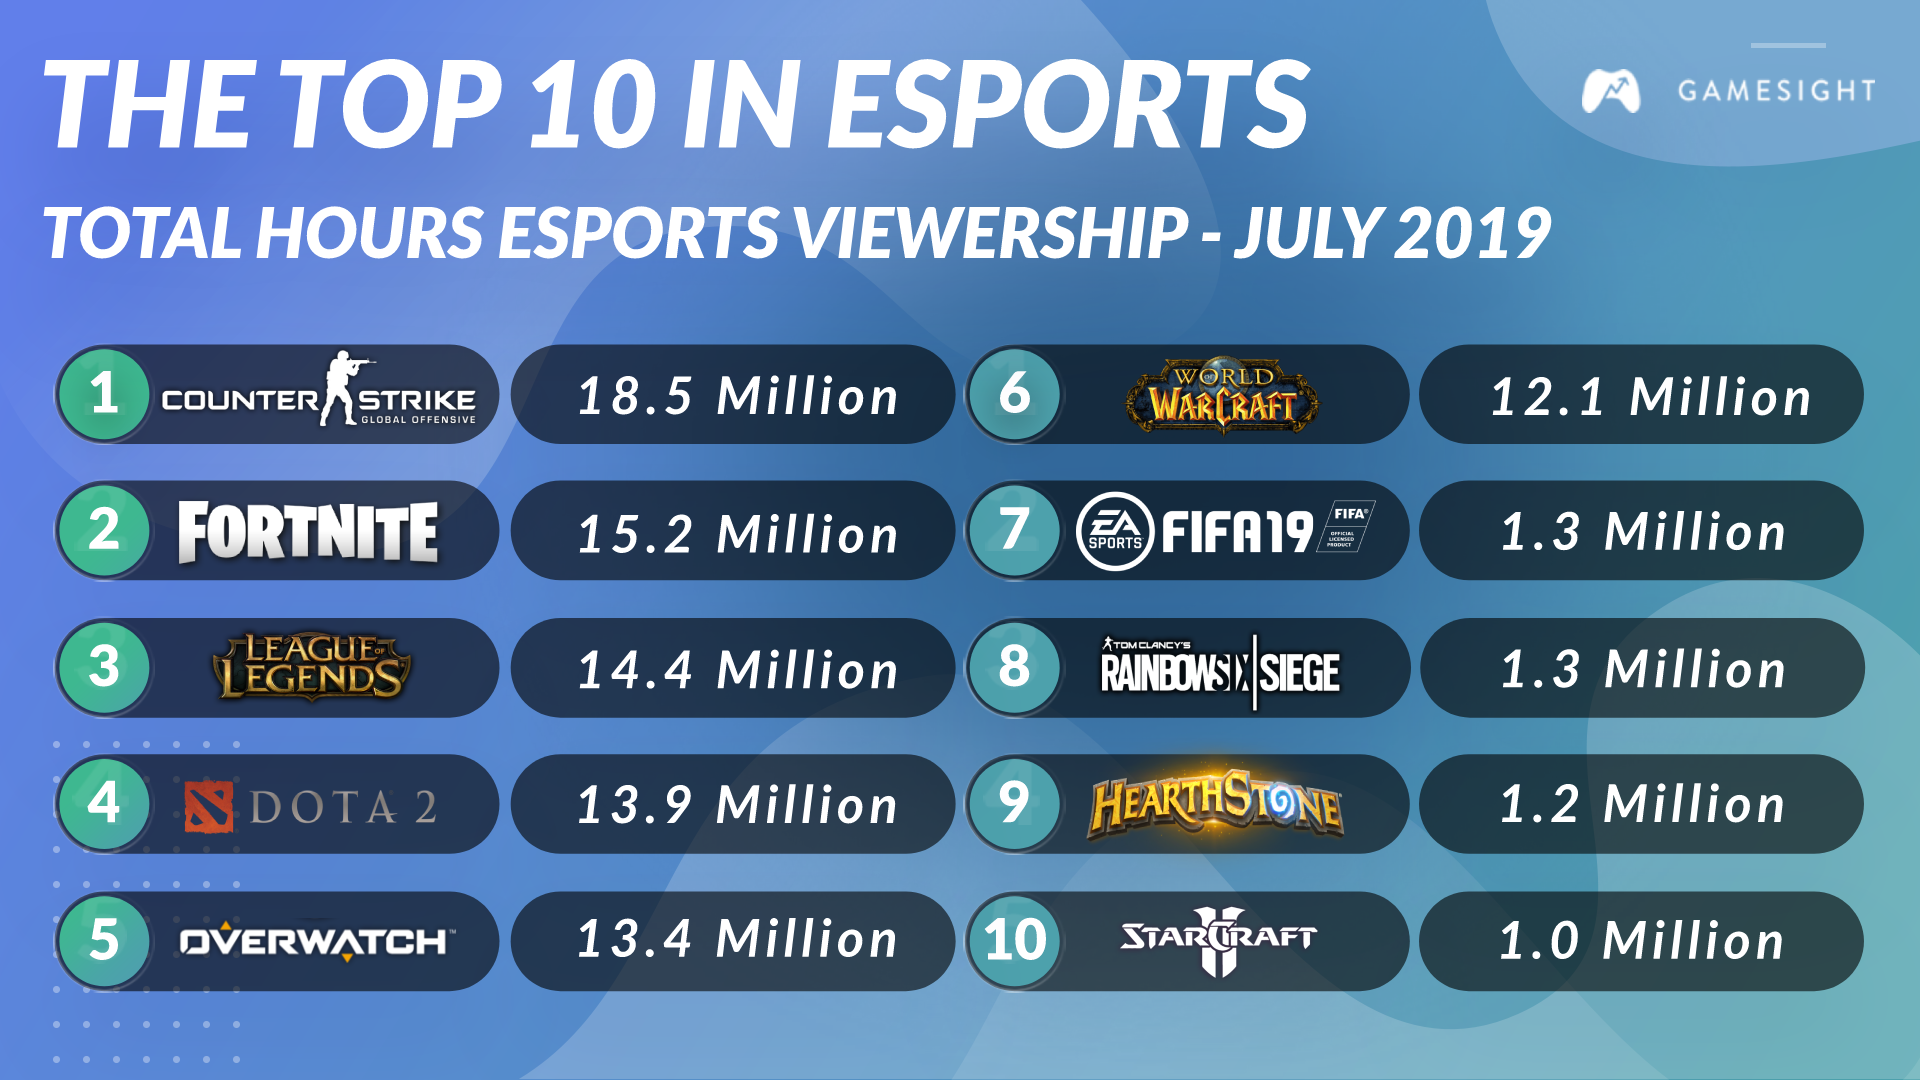 Top 10 Games in Esports